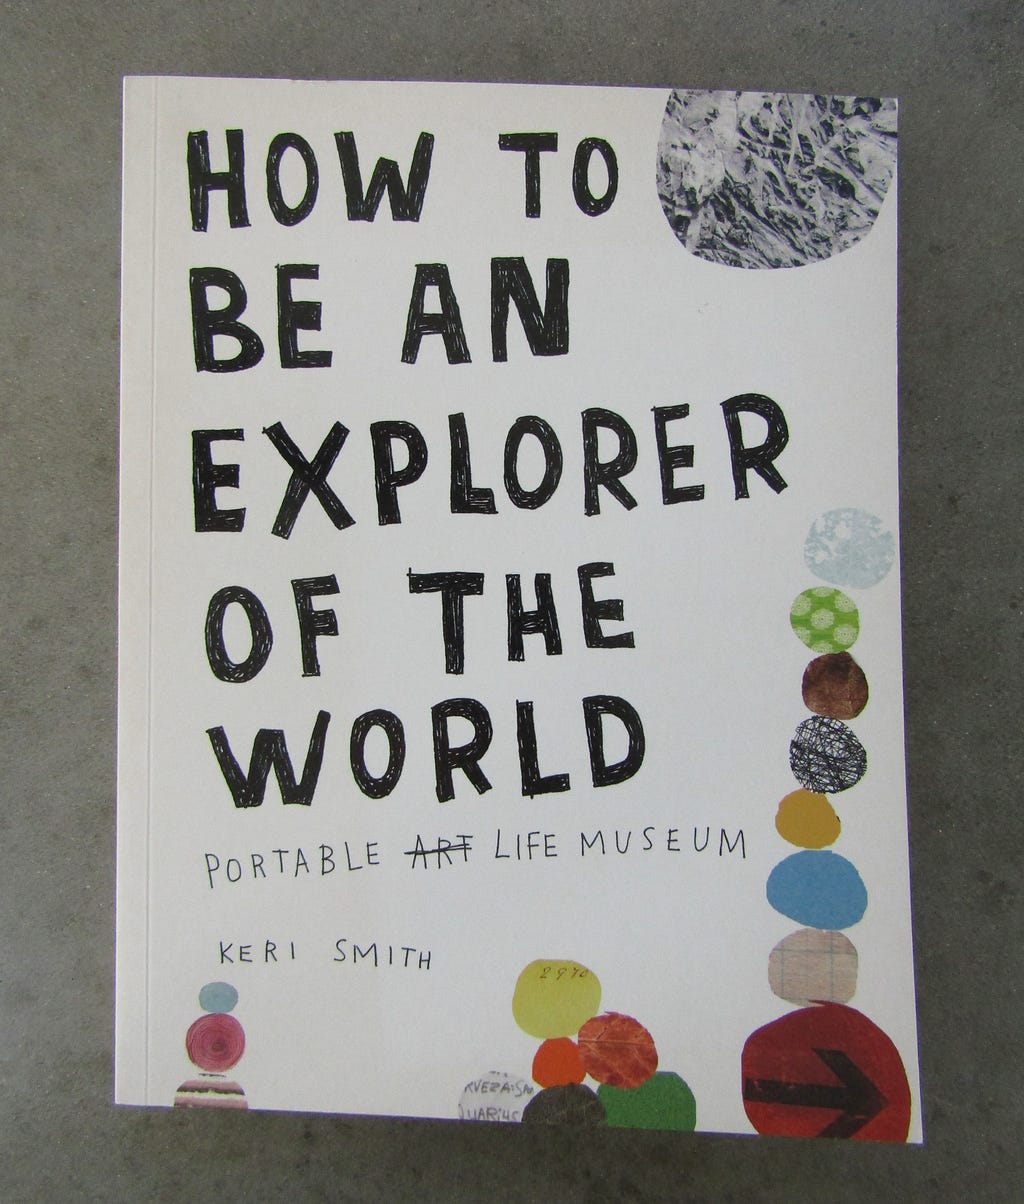 How To Be An Explorer Of The World by Keri Smith